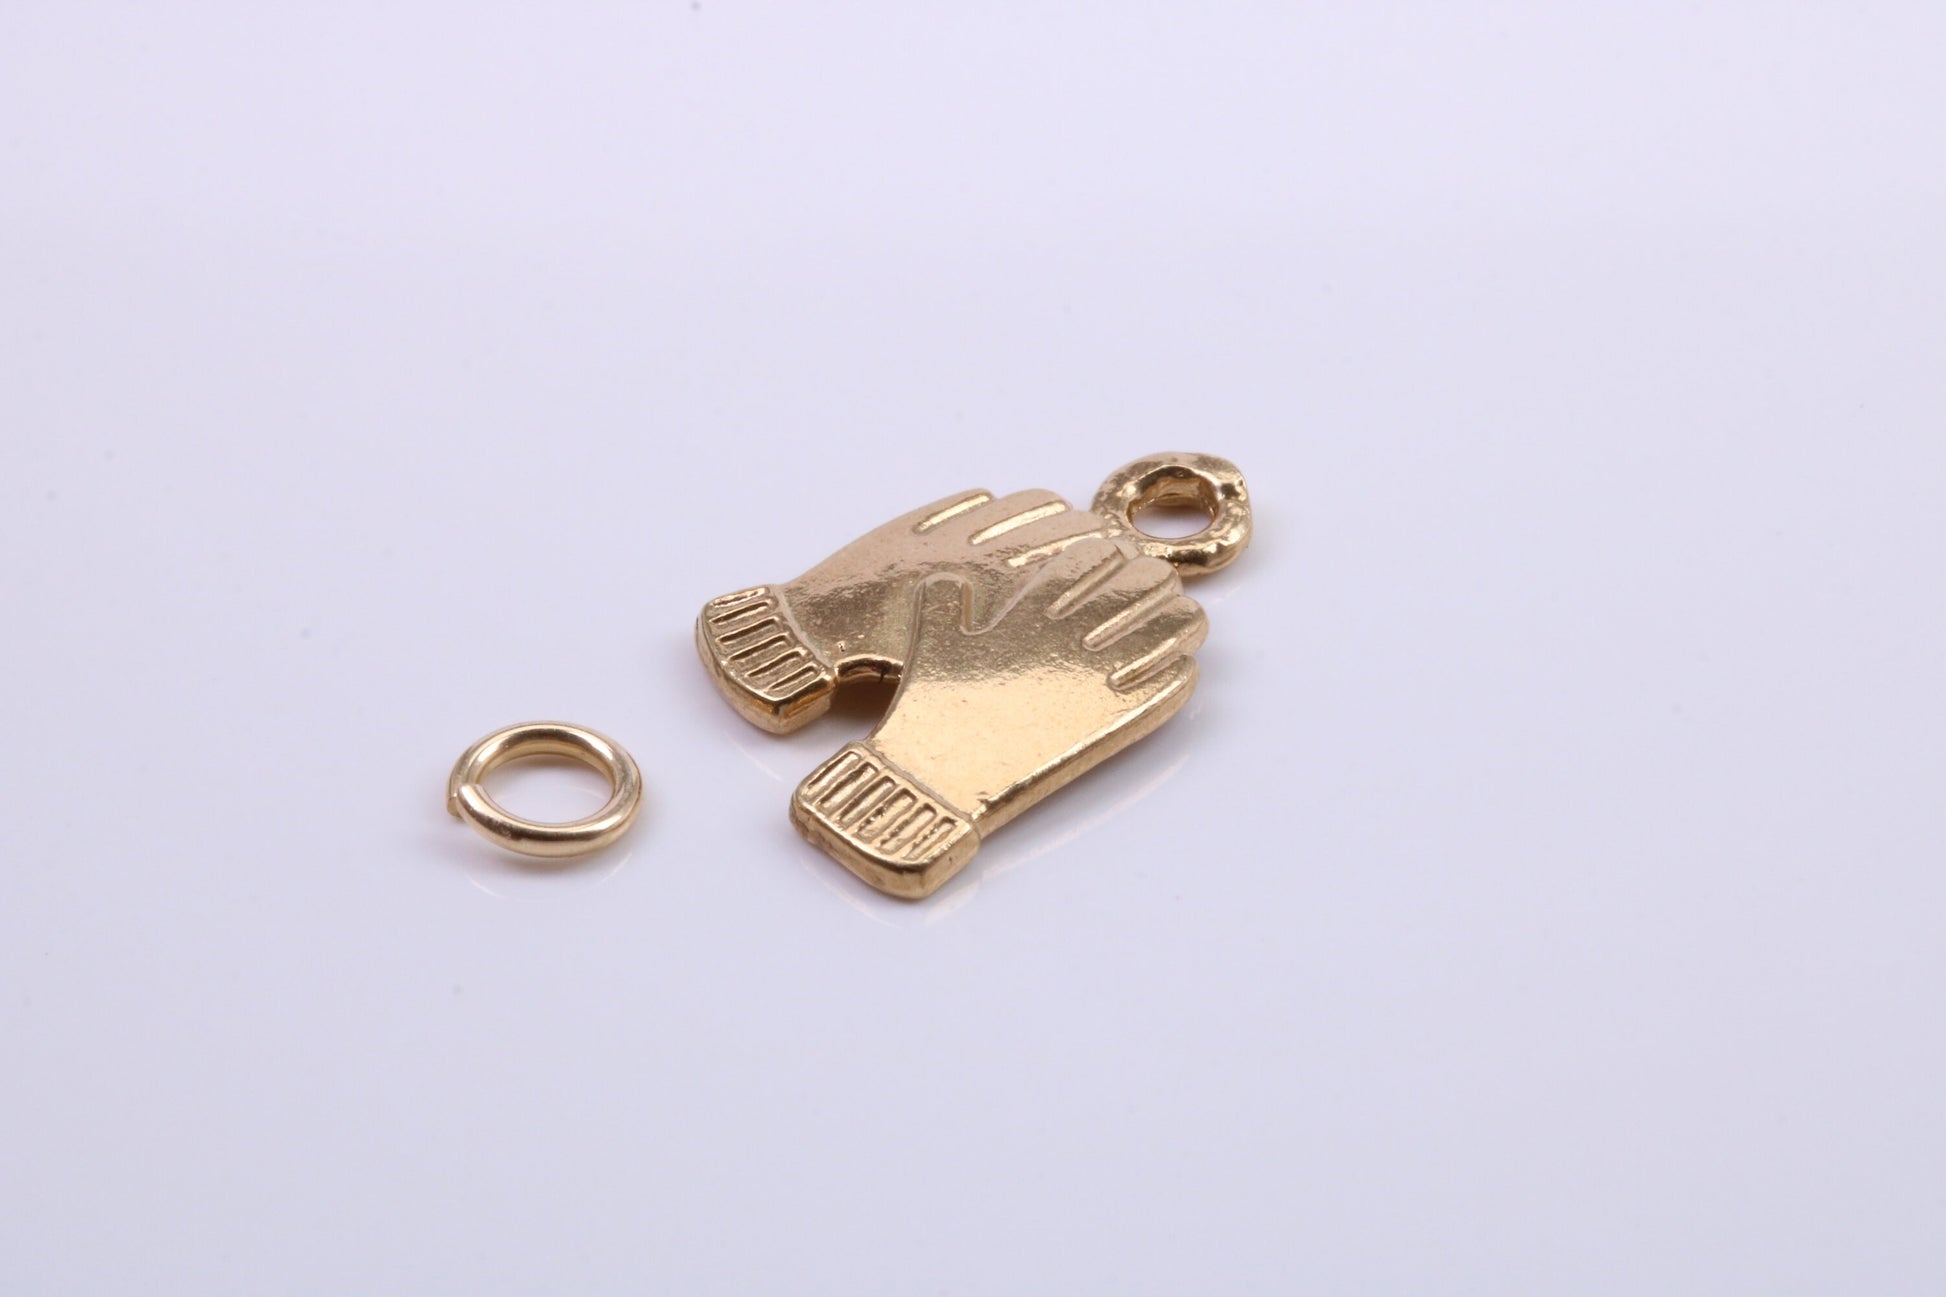 Gloves Charm, Traditional Charm, Made from Solid 9ct Yellow Gold, British Hallmarked, Complete with Attachment Link